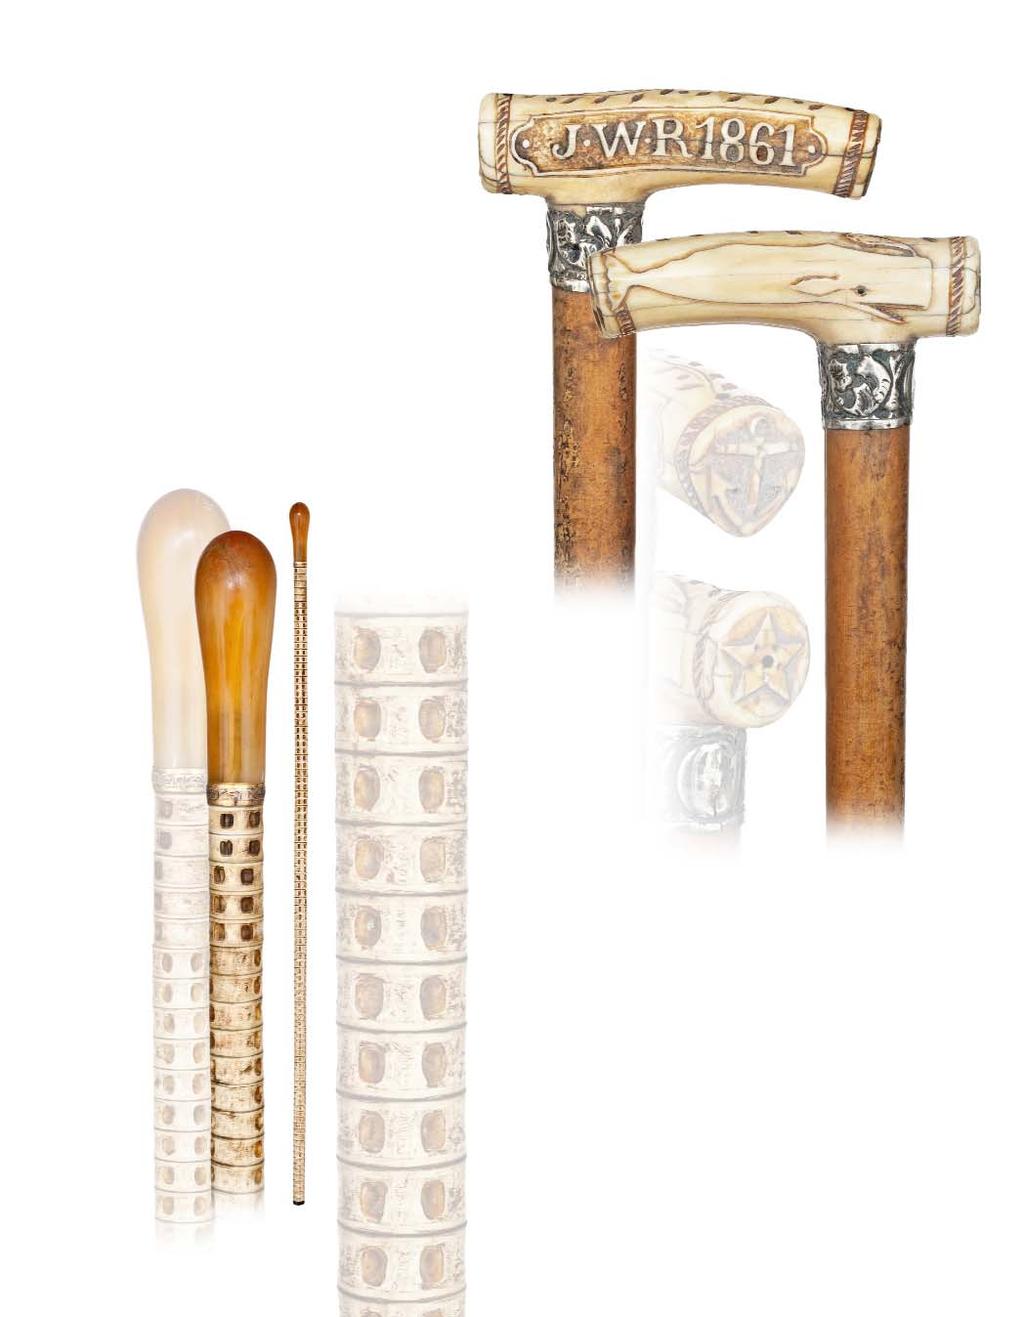 7. Commemorative Marine Cane Dated 1861-Ivory handle in classic Opera shape carved with a whale on one side and a shield inscribed J.W.R 1861. on the other.